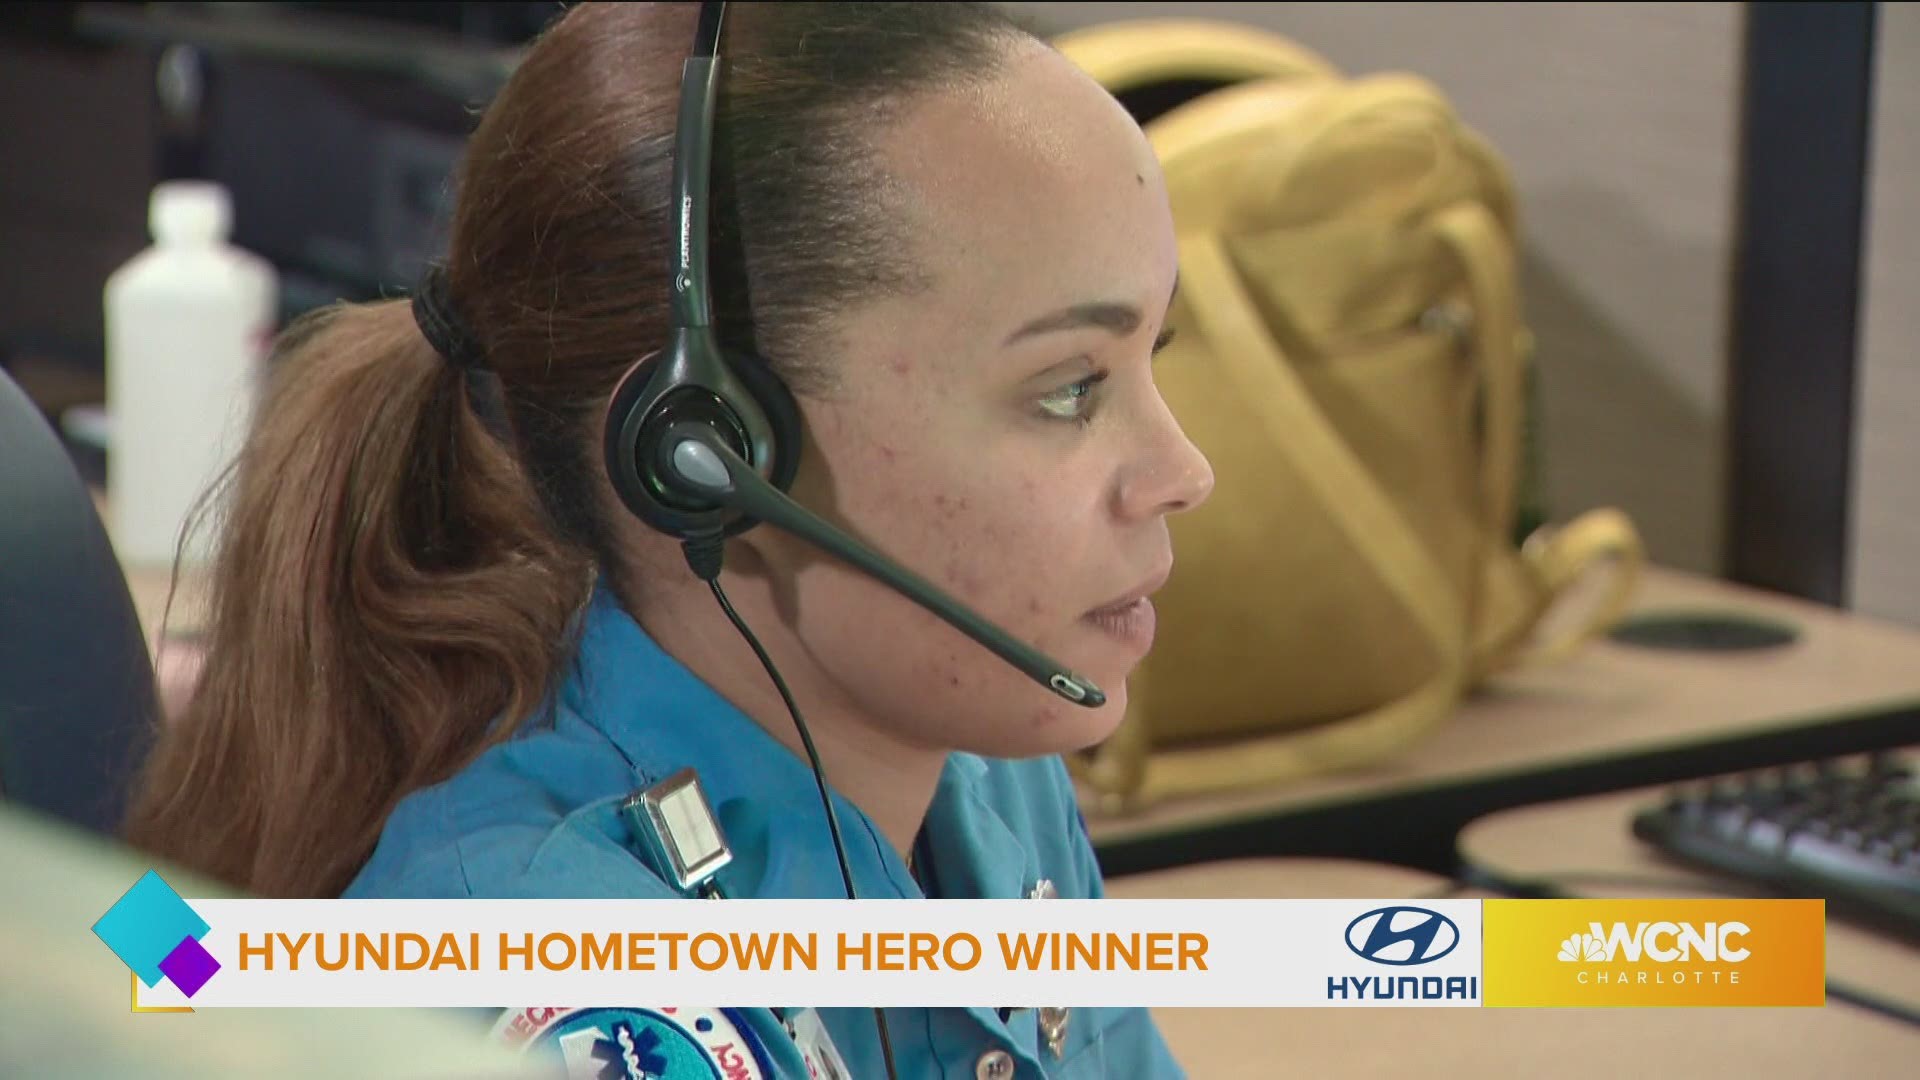 Meet the 911 operator who is our newest Hyundai Hometown Hero